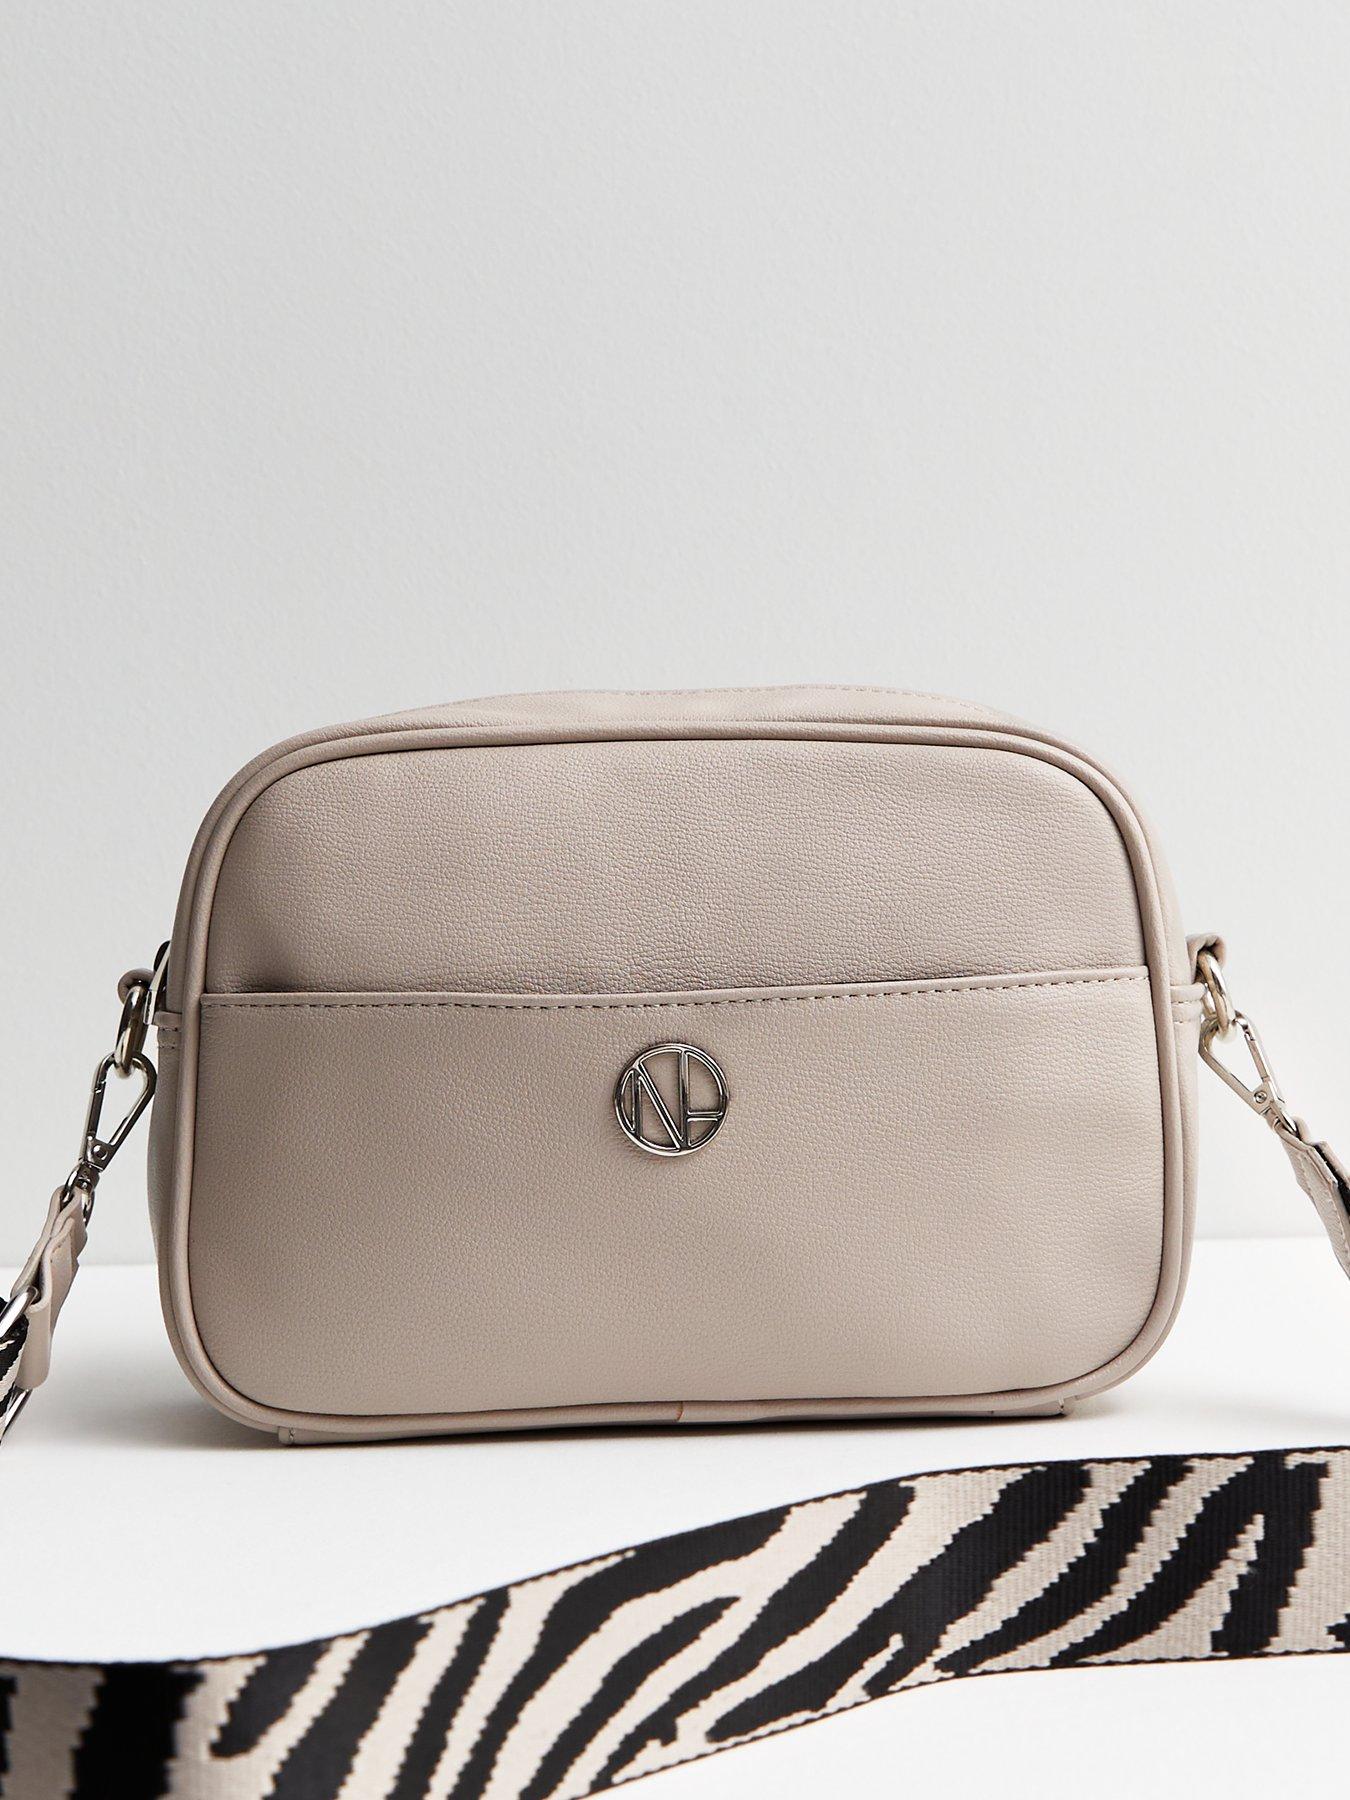 Shop Women's New Look Small Purses up to 85% Off | DealDoodle